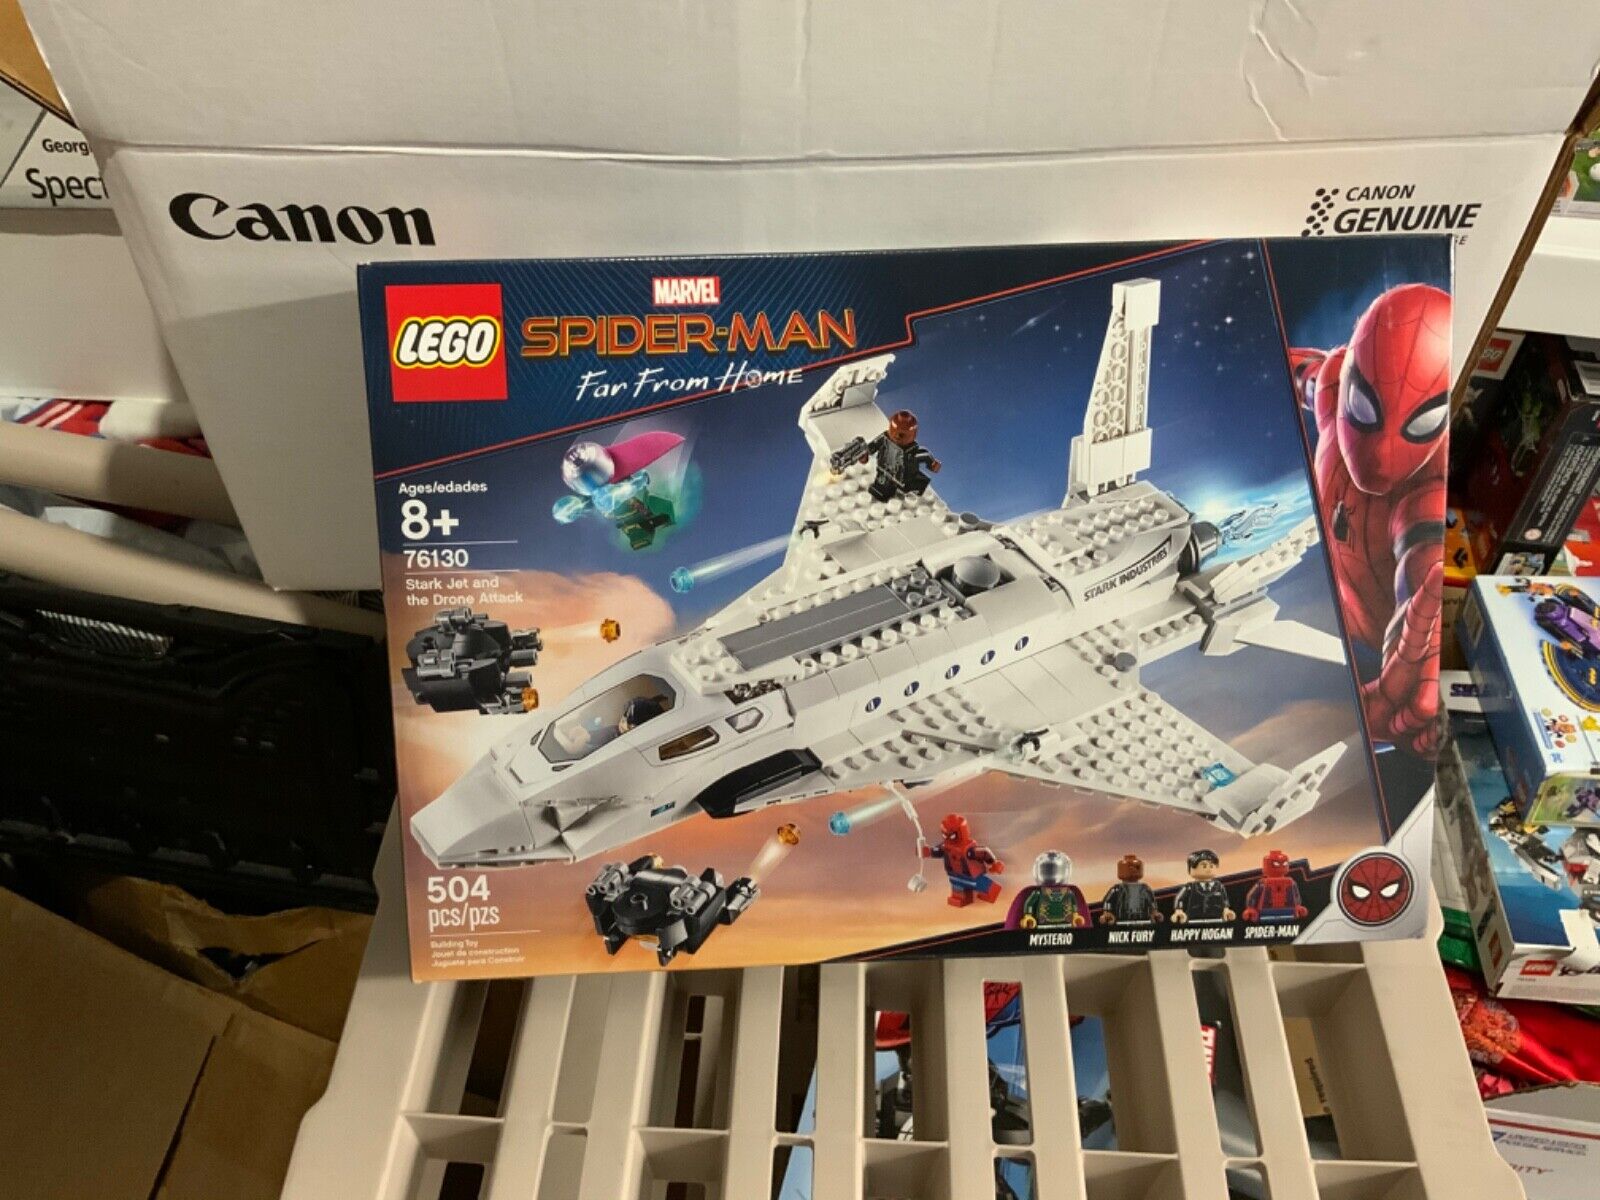 Retired:  LEGO MARVEL SPIDER-MAN FAR FROM HOME STARK JET THE DRONE ATTACK 76130